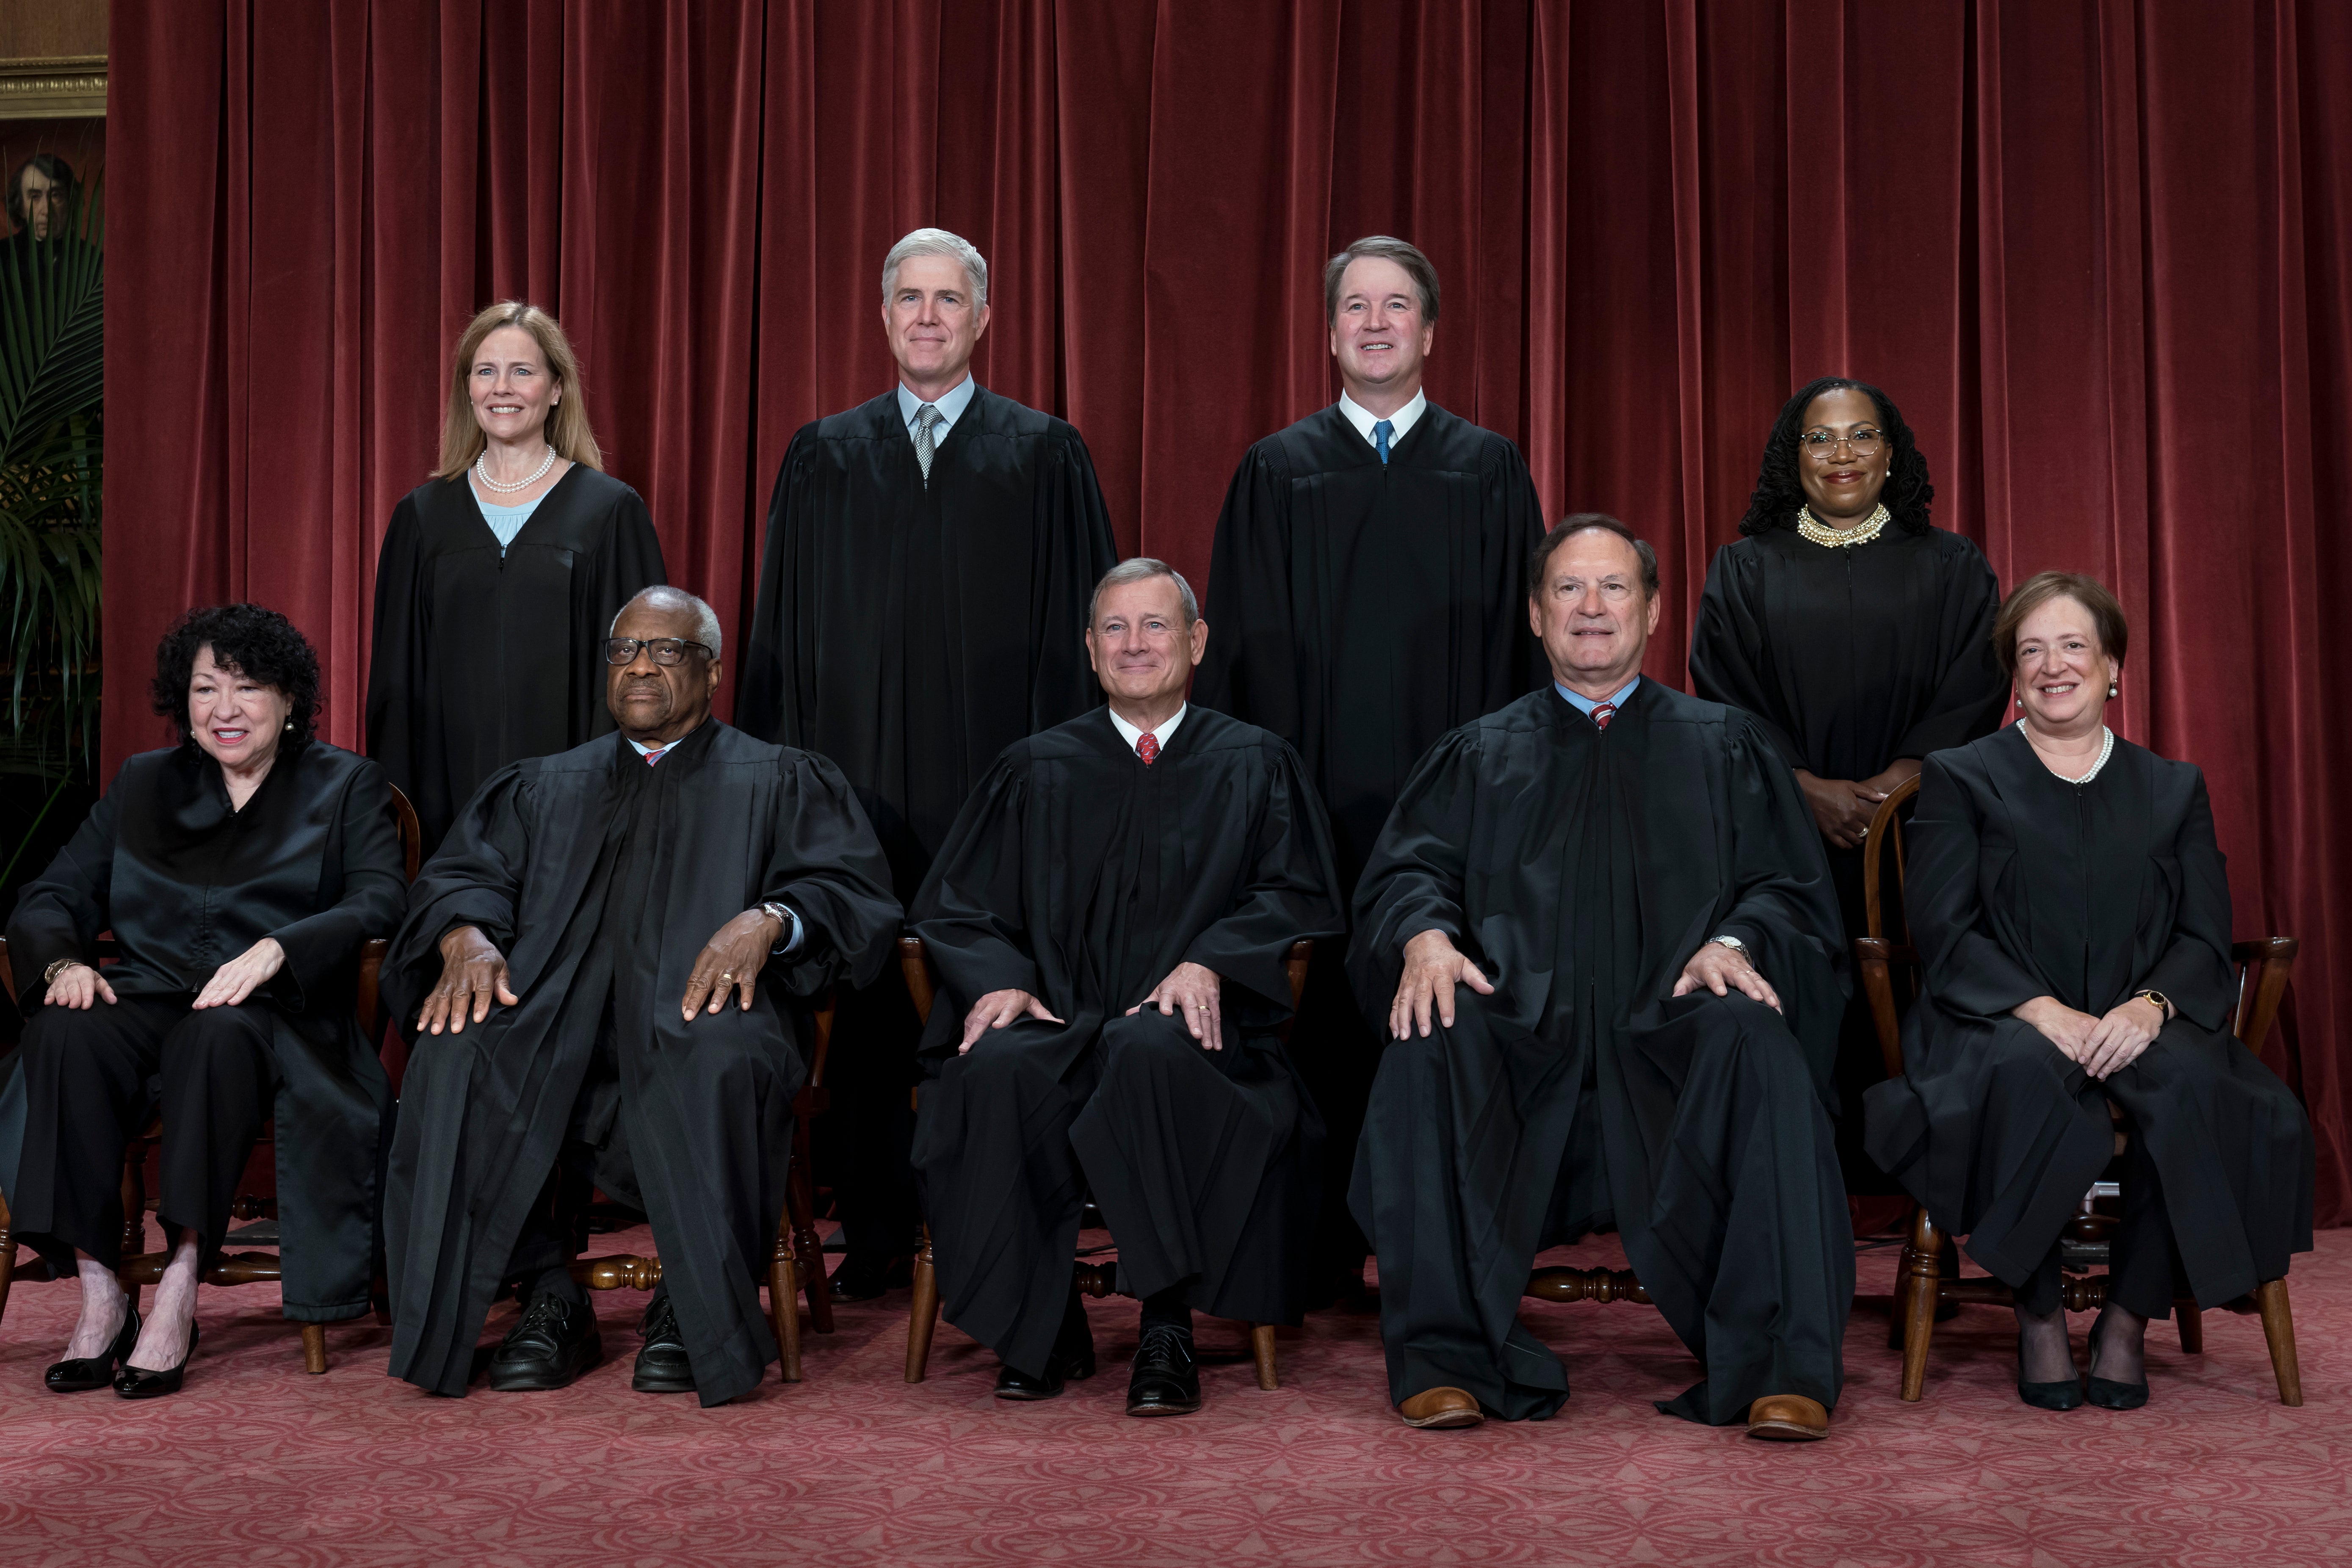 The current justice of the Supreme Court. Sonia Sotomayor, Elena Kagan and Ketanji Brown Jackson make up the liberal bloc. Chief John Roberts, Clarence Thomas, Samuel Alito, Neil Gorsuch, Brett Kavanaugh and Barrett make up the conservative view